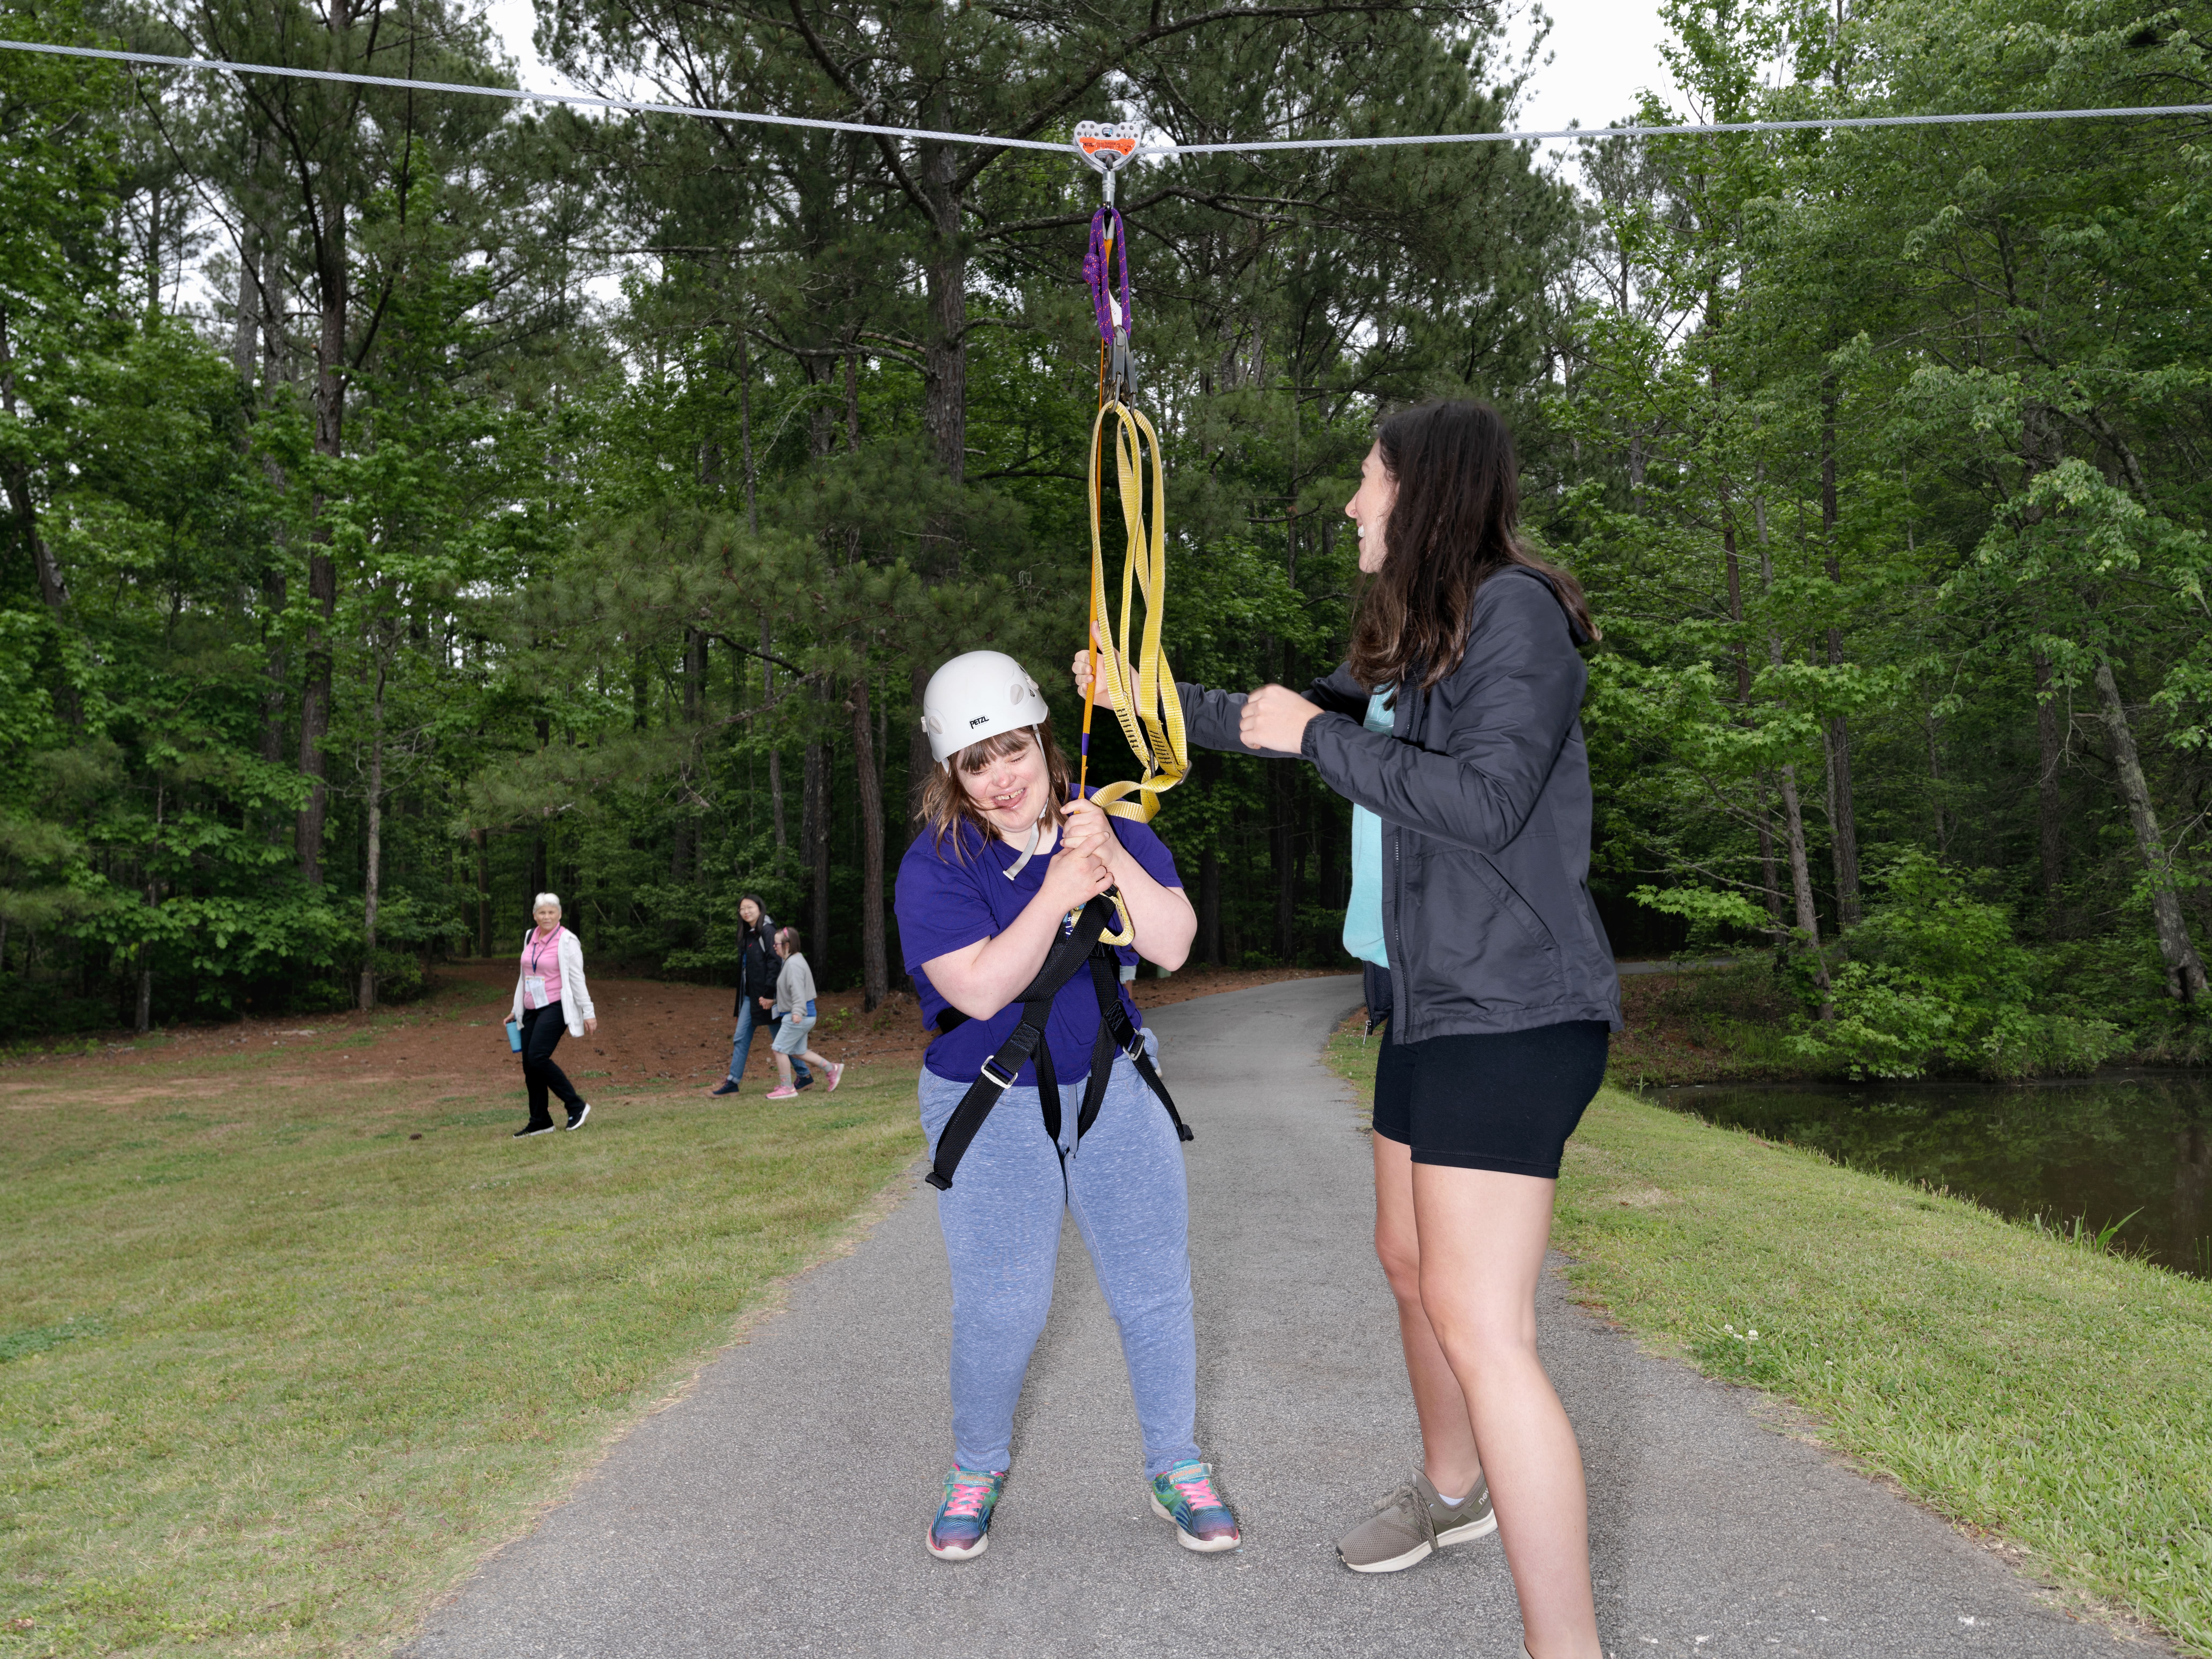 Camper Deb Curry ends her run on the zipline during Toni's Camp in Rutledge. Photo by Johnathon Kelso